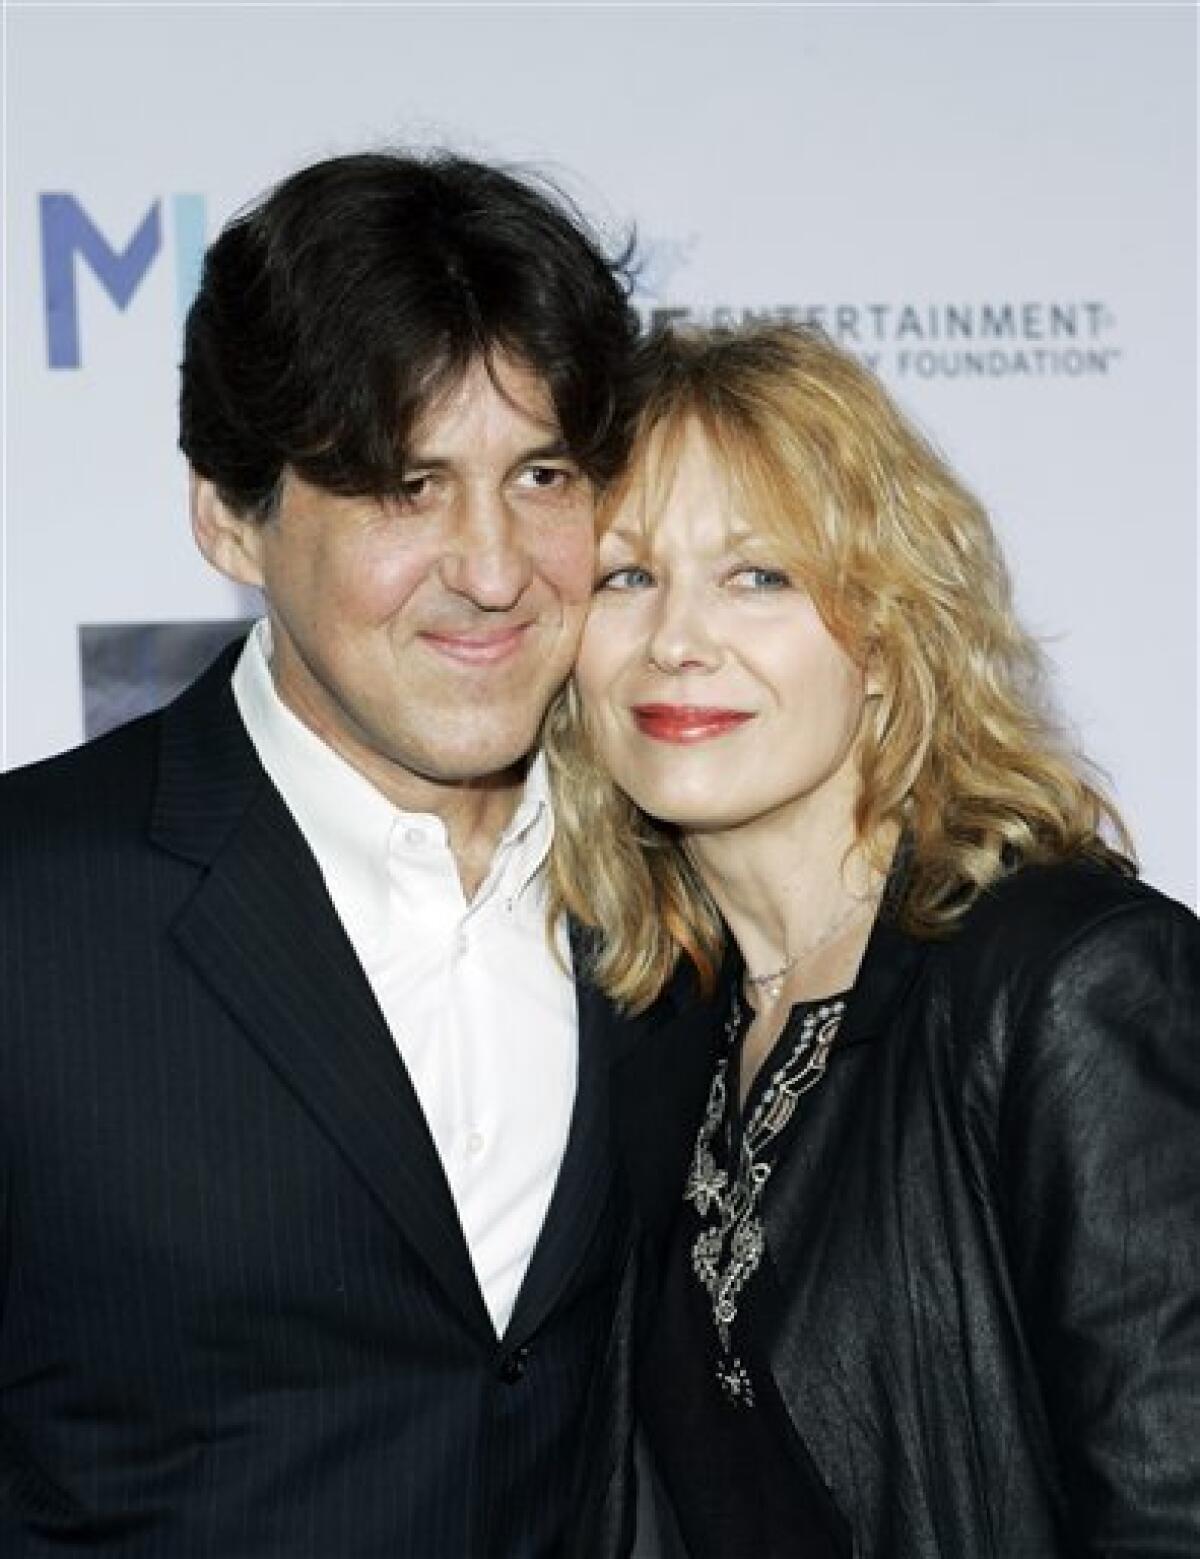 FILE - In this March 22, 2007 file photo, director Cameron Crowe and his wife Nancy Wilson arrive at Mentor LA's Promise Gala honoring Tom Cruise for his commitment to the welfare of LA's youth in Los Angeles. (AP Photo/Kevork Djansezian, file)